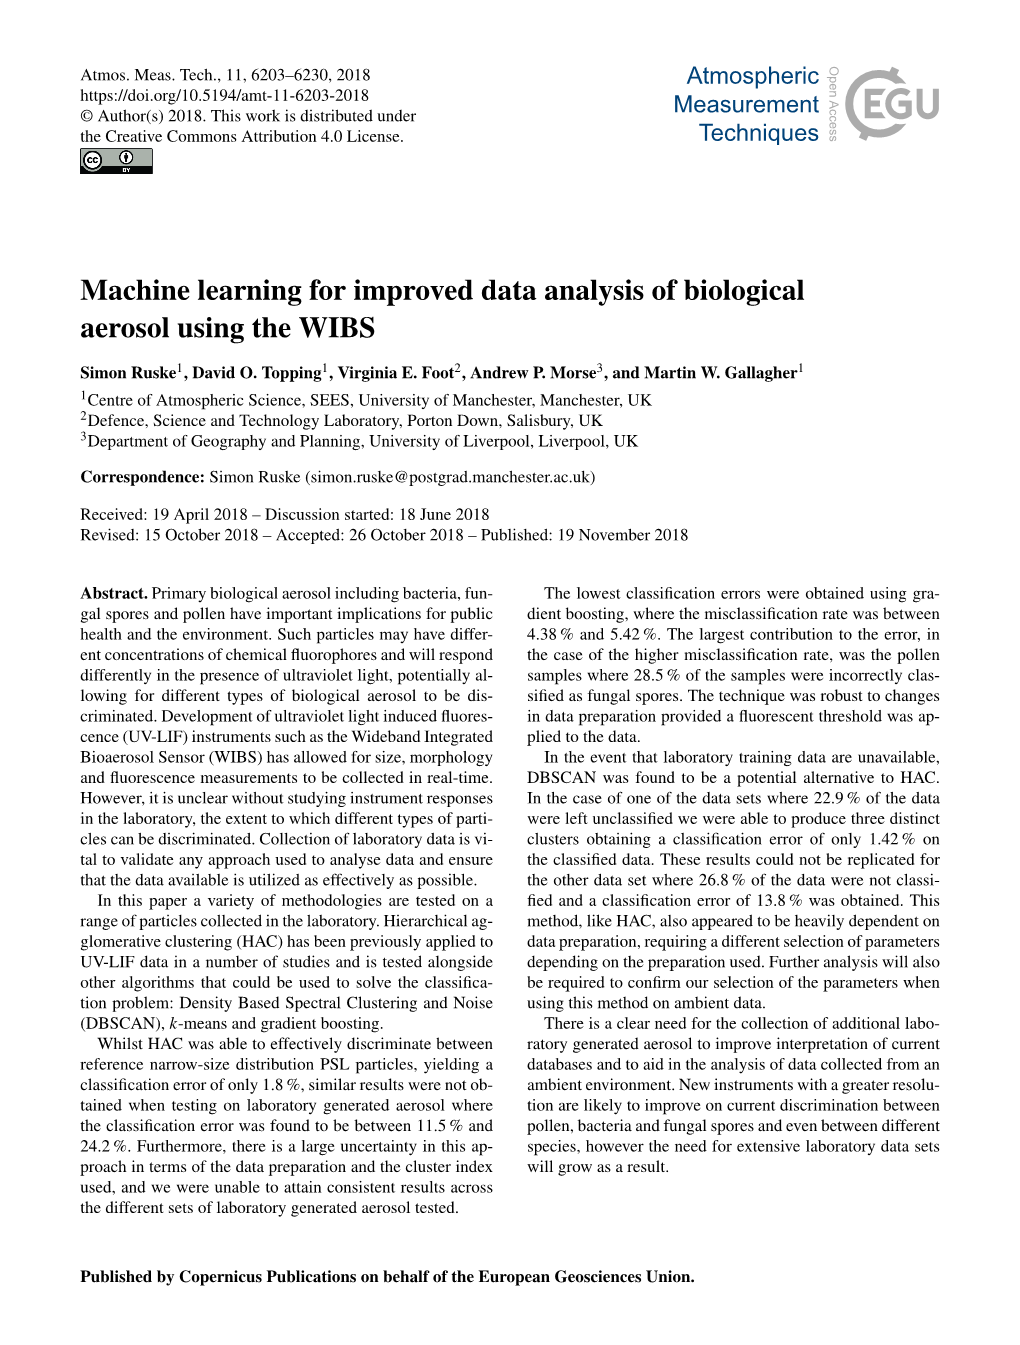 Machine Learning for Improved Data Analysis of Biological Aerosol Using the WIBS